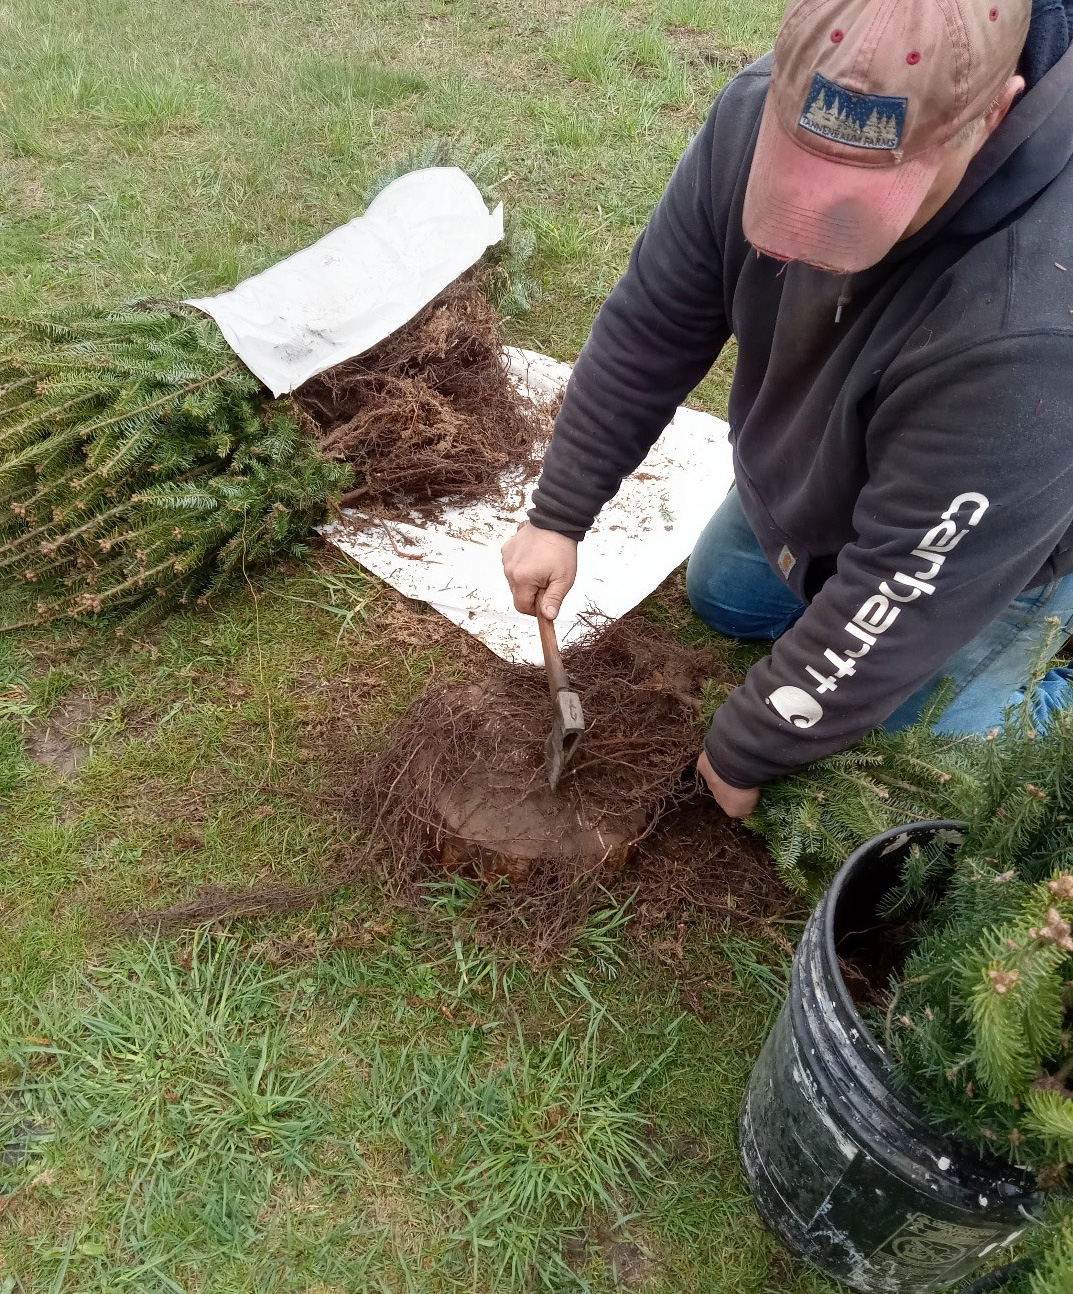 Photo of a person kneeling next to a horizontal stack of Christmas tree seedlings and using a hatchet to prune the oversized roots of a transplant. Pruning the roots reduces the nutrient production burden on the needles and makes it easier to position the roots and root collar correctly when transplanting seedlings in the field.